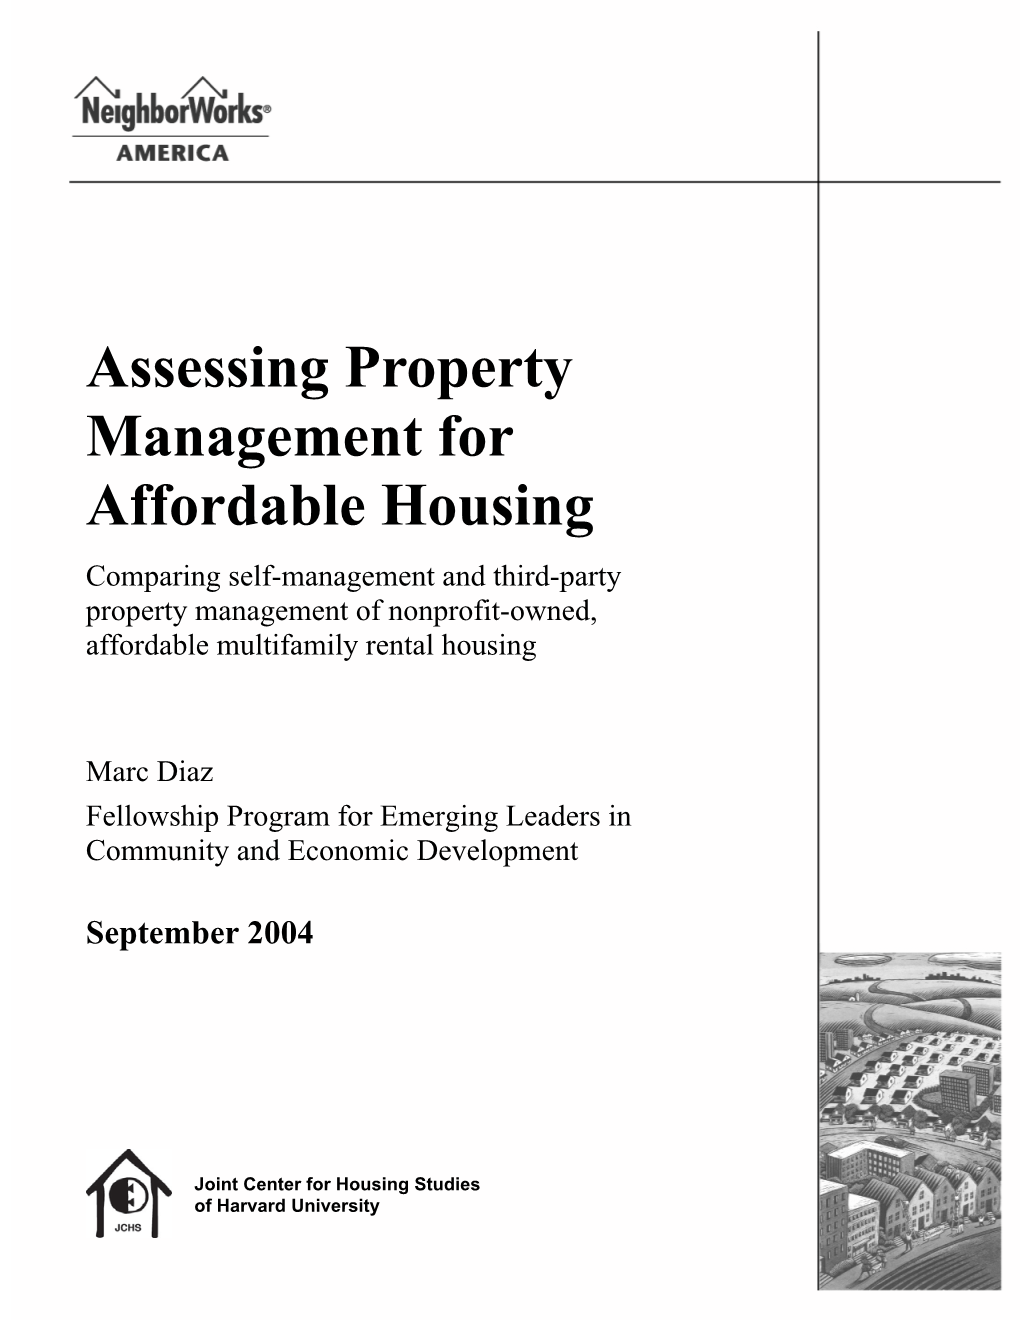 Assessing Property Management for Affordable Housing